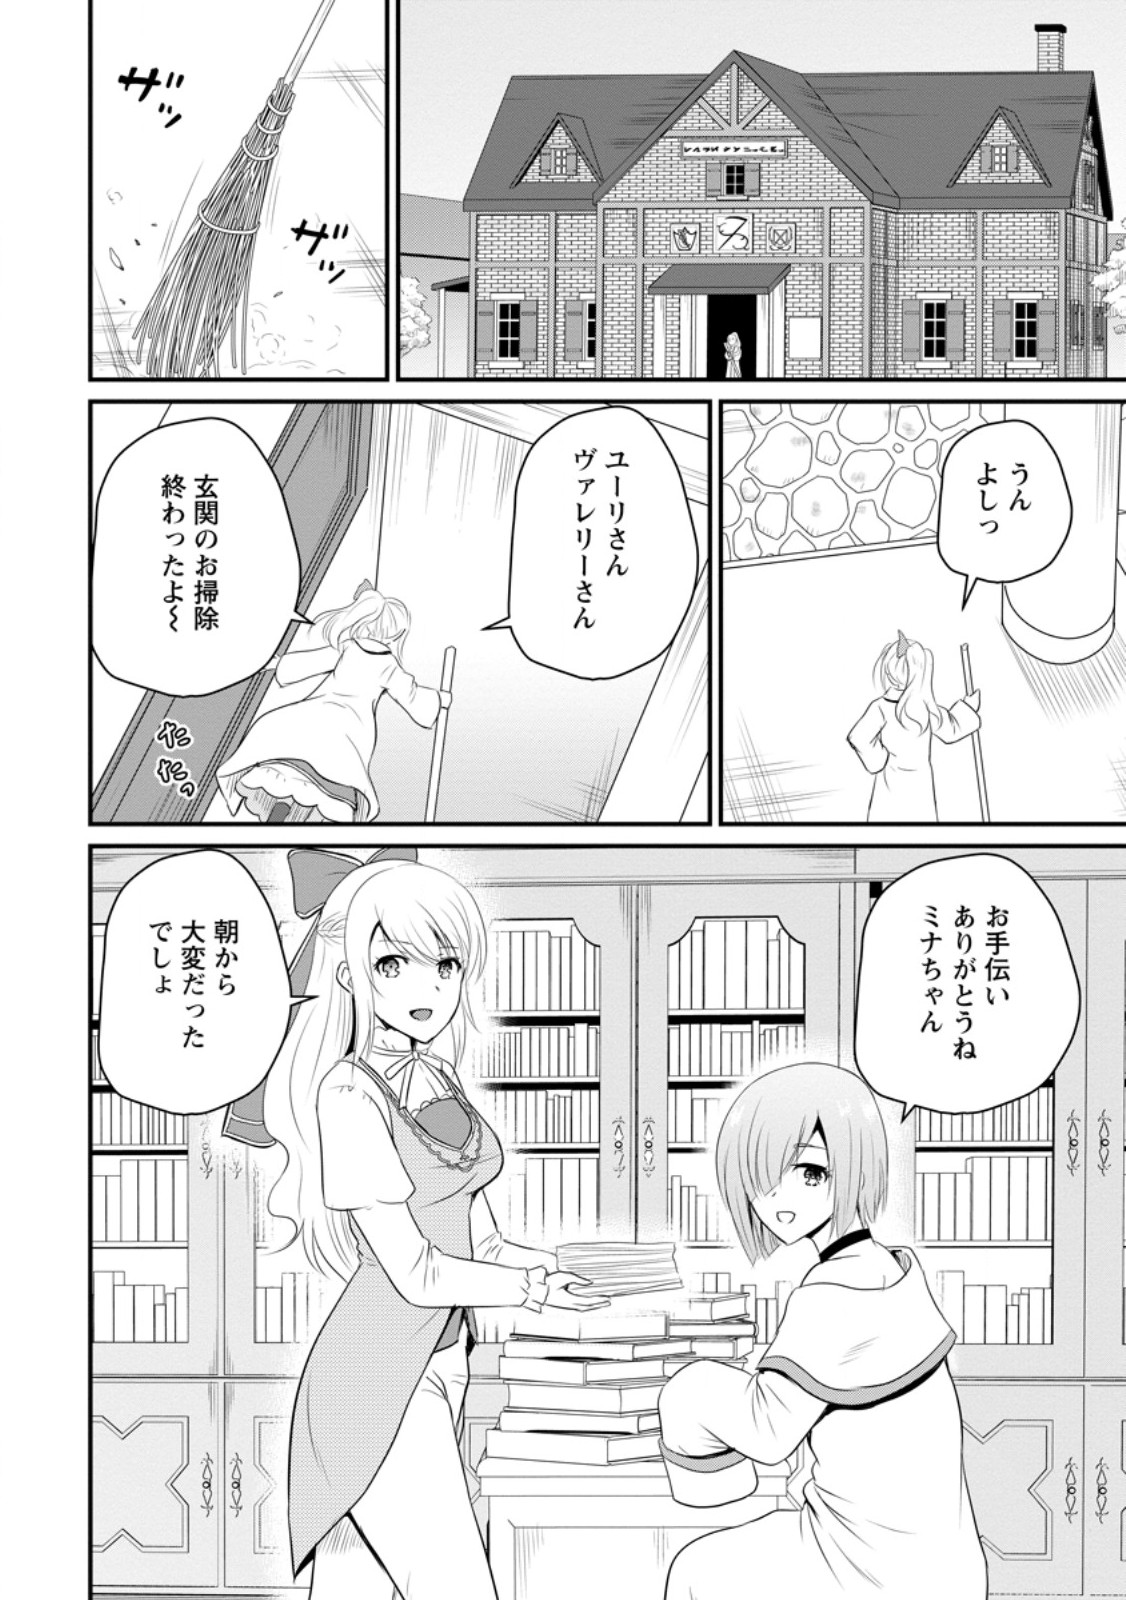 The Frontier Life of The Low-Class Ossan Healer And The Lovery Girl - Chapter 45.1 - Page 2